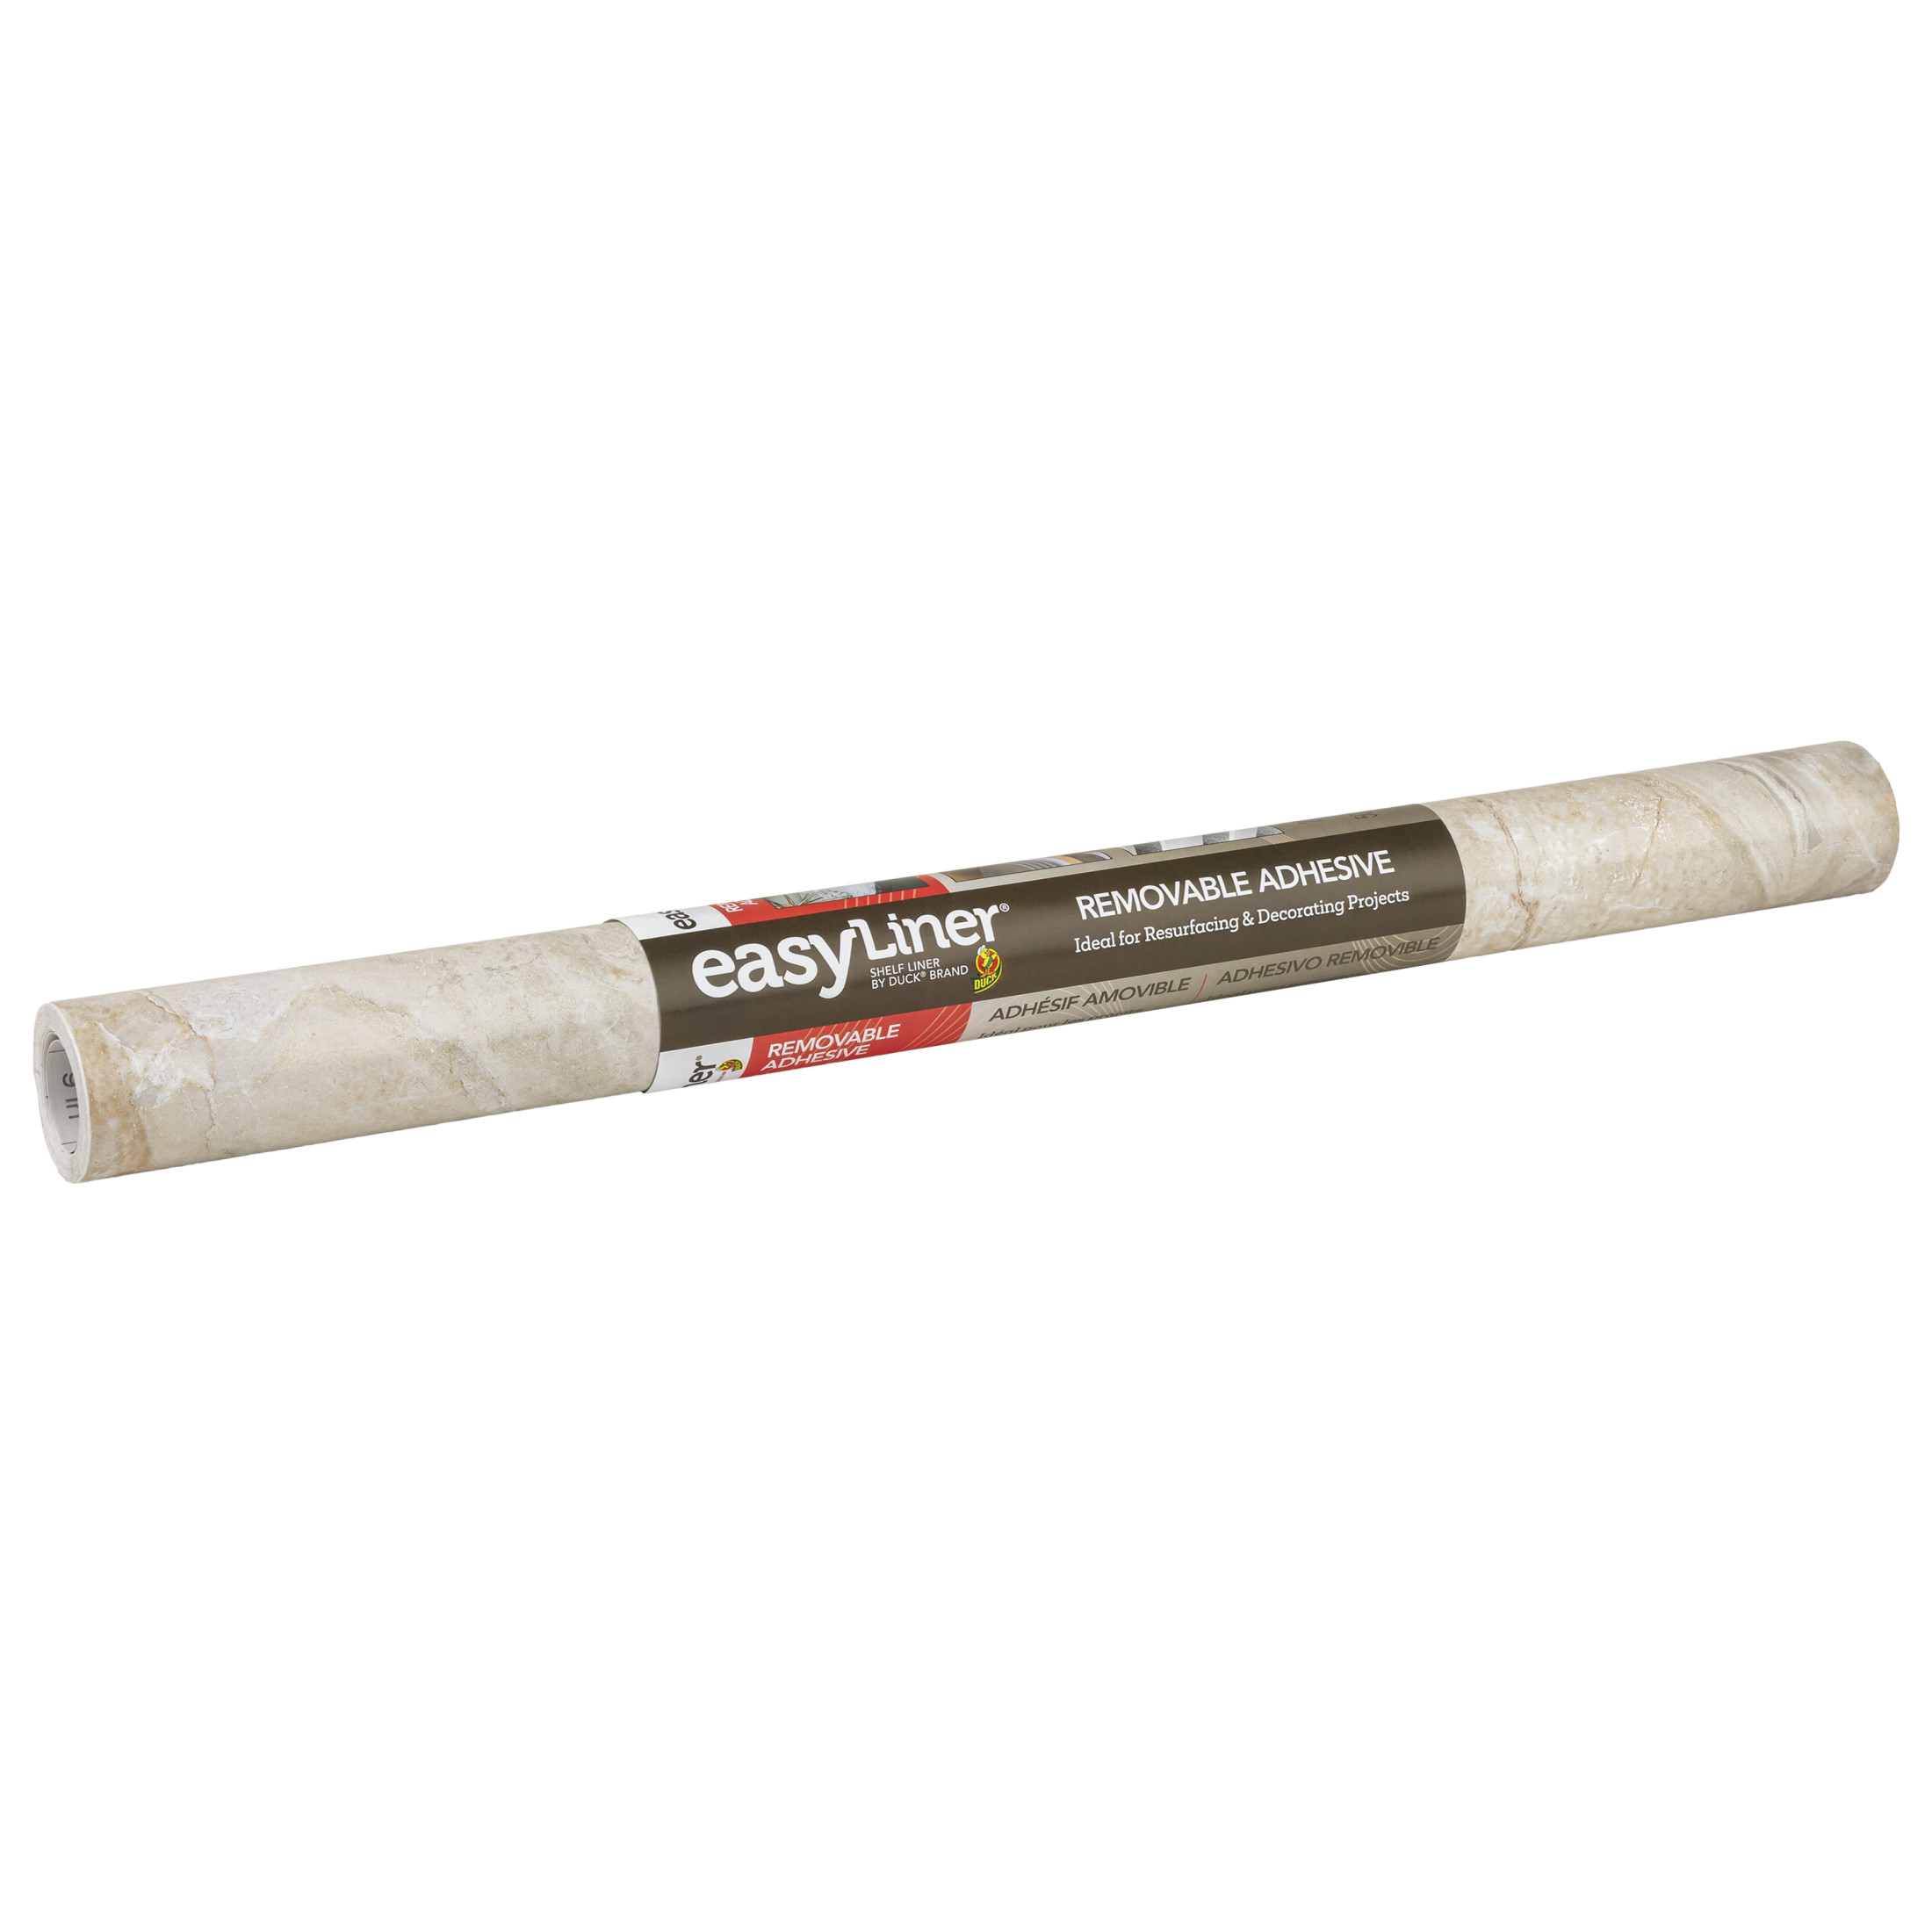 EasyLiner Brand Contact Paper Adhesive Shelf Liner, Beige Marble, 20 in. x 15 ft. Roll - image 3 of 11